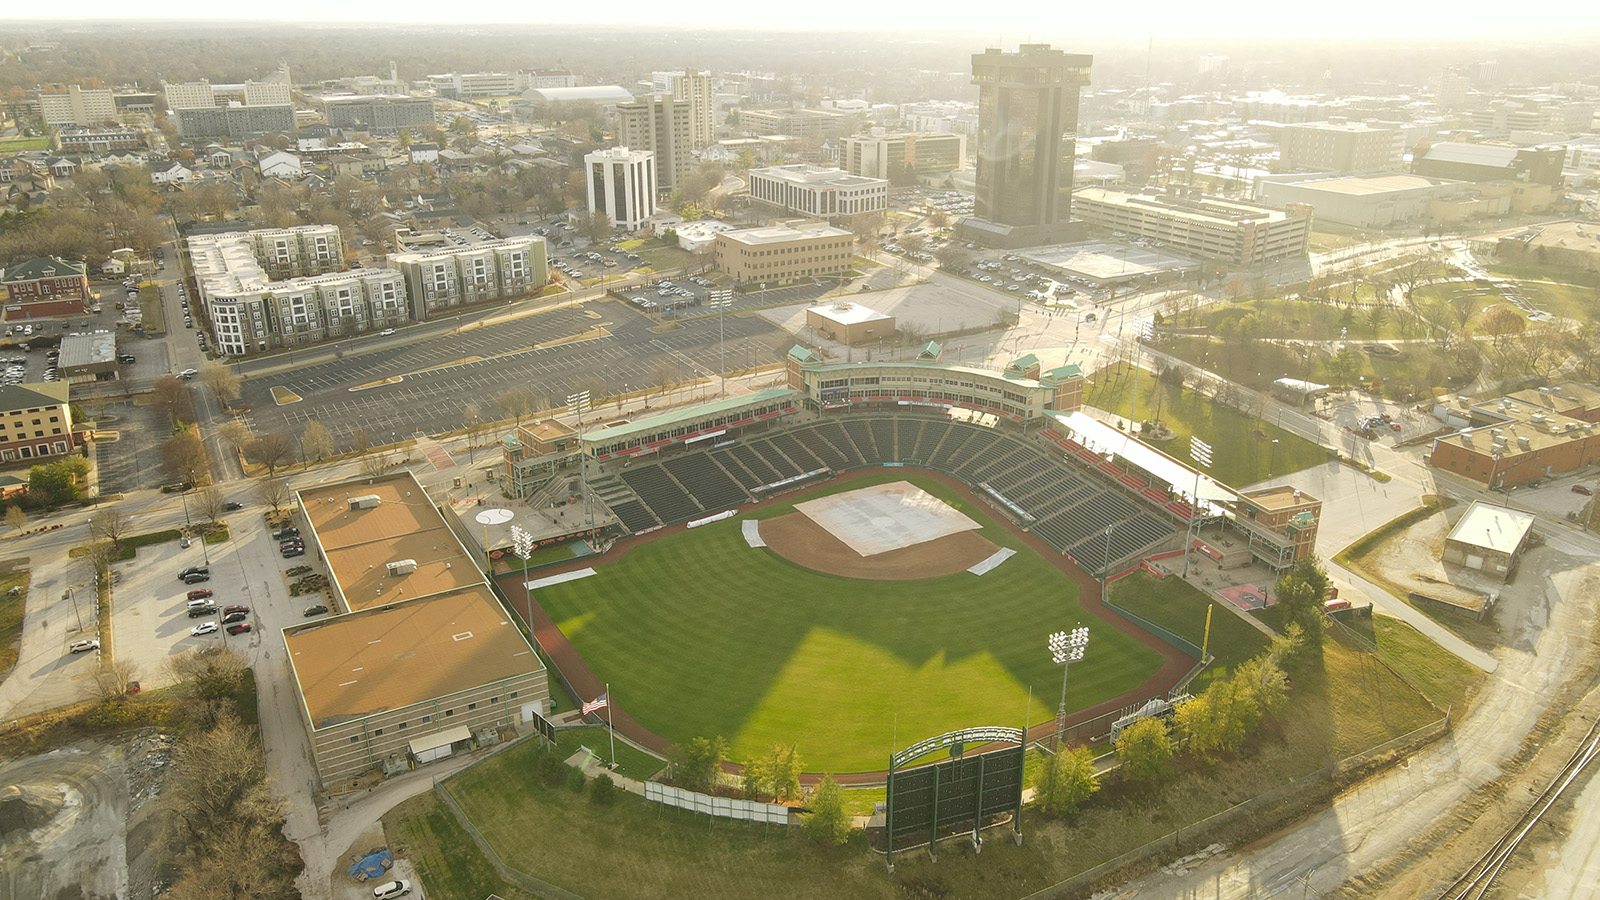 Cardinals will roost in Springfield as city cuts $16M deal to buy, upgrade stadium